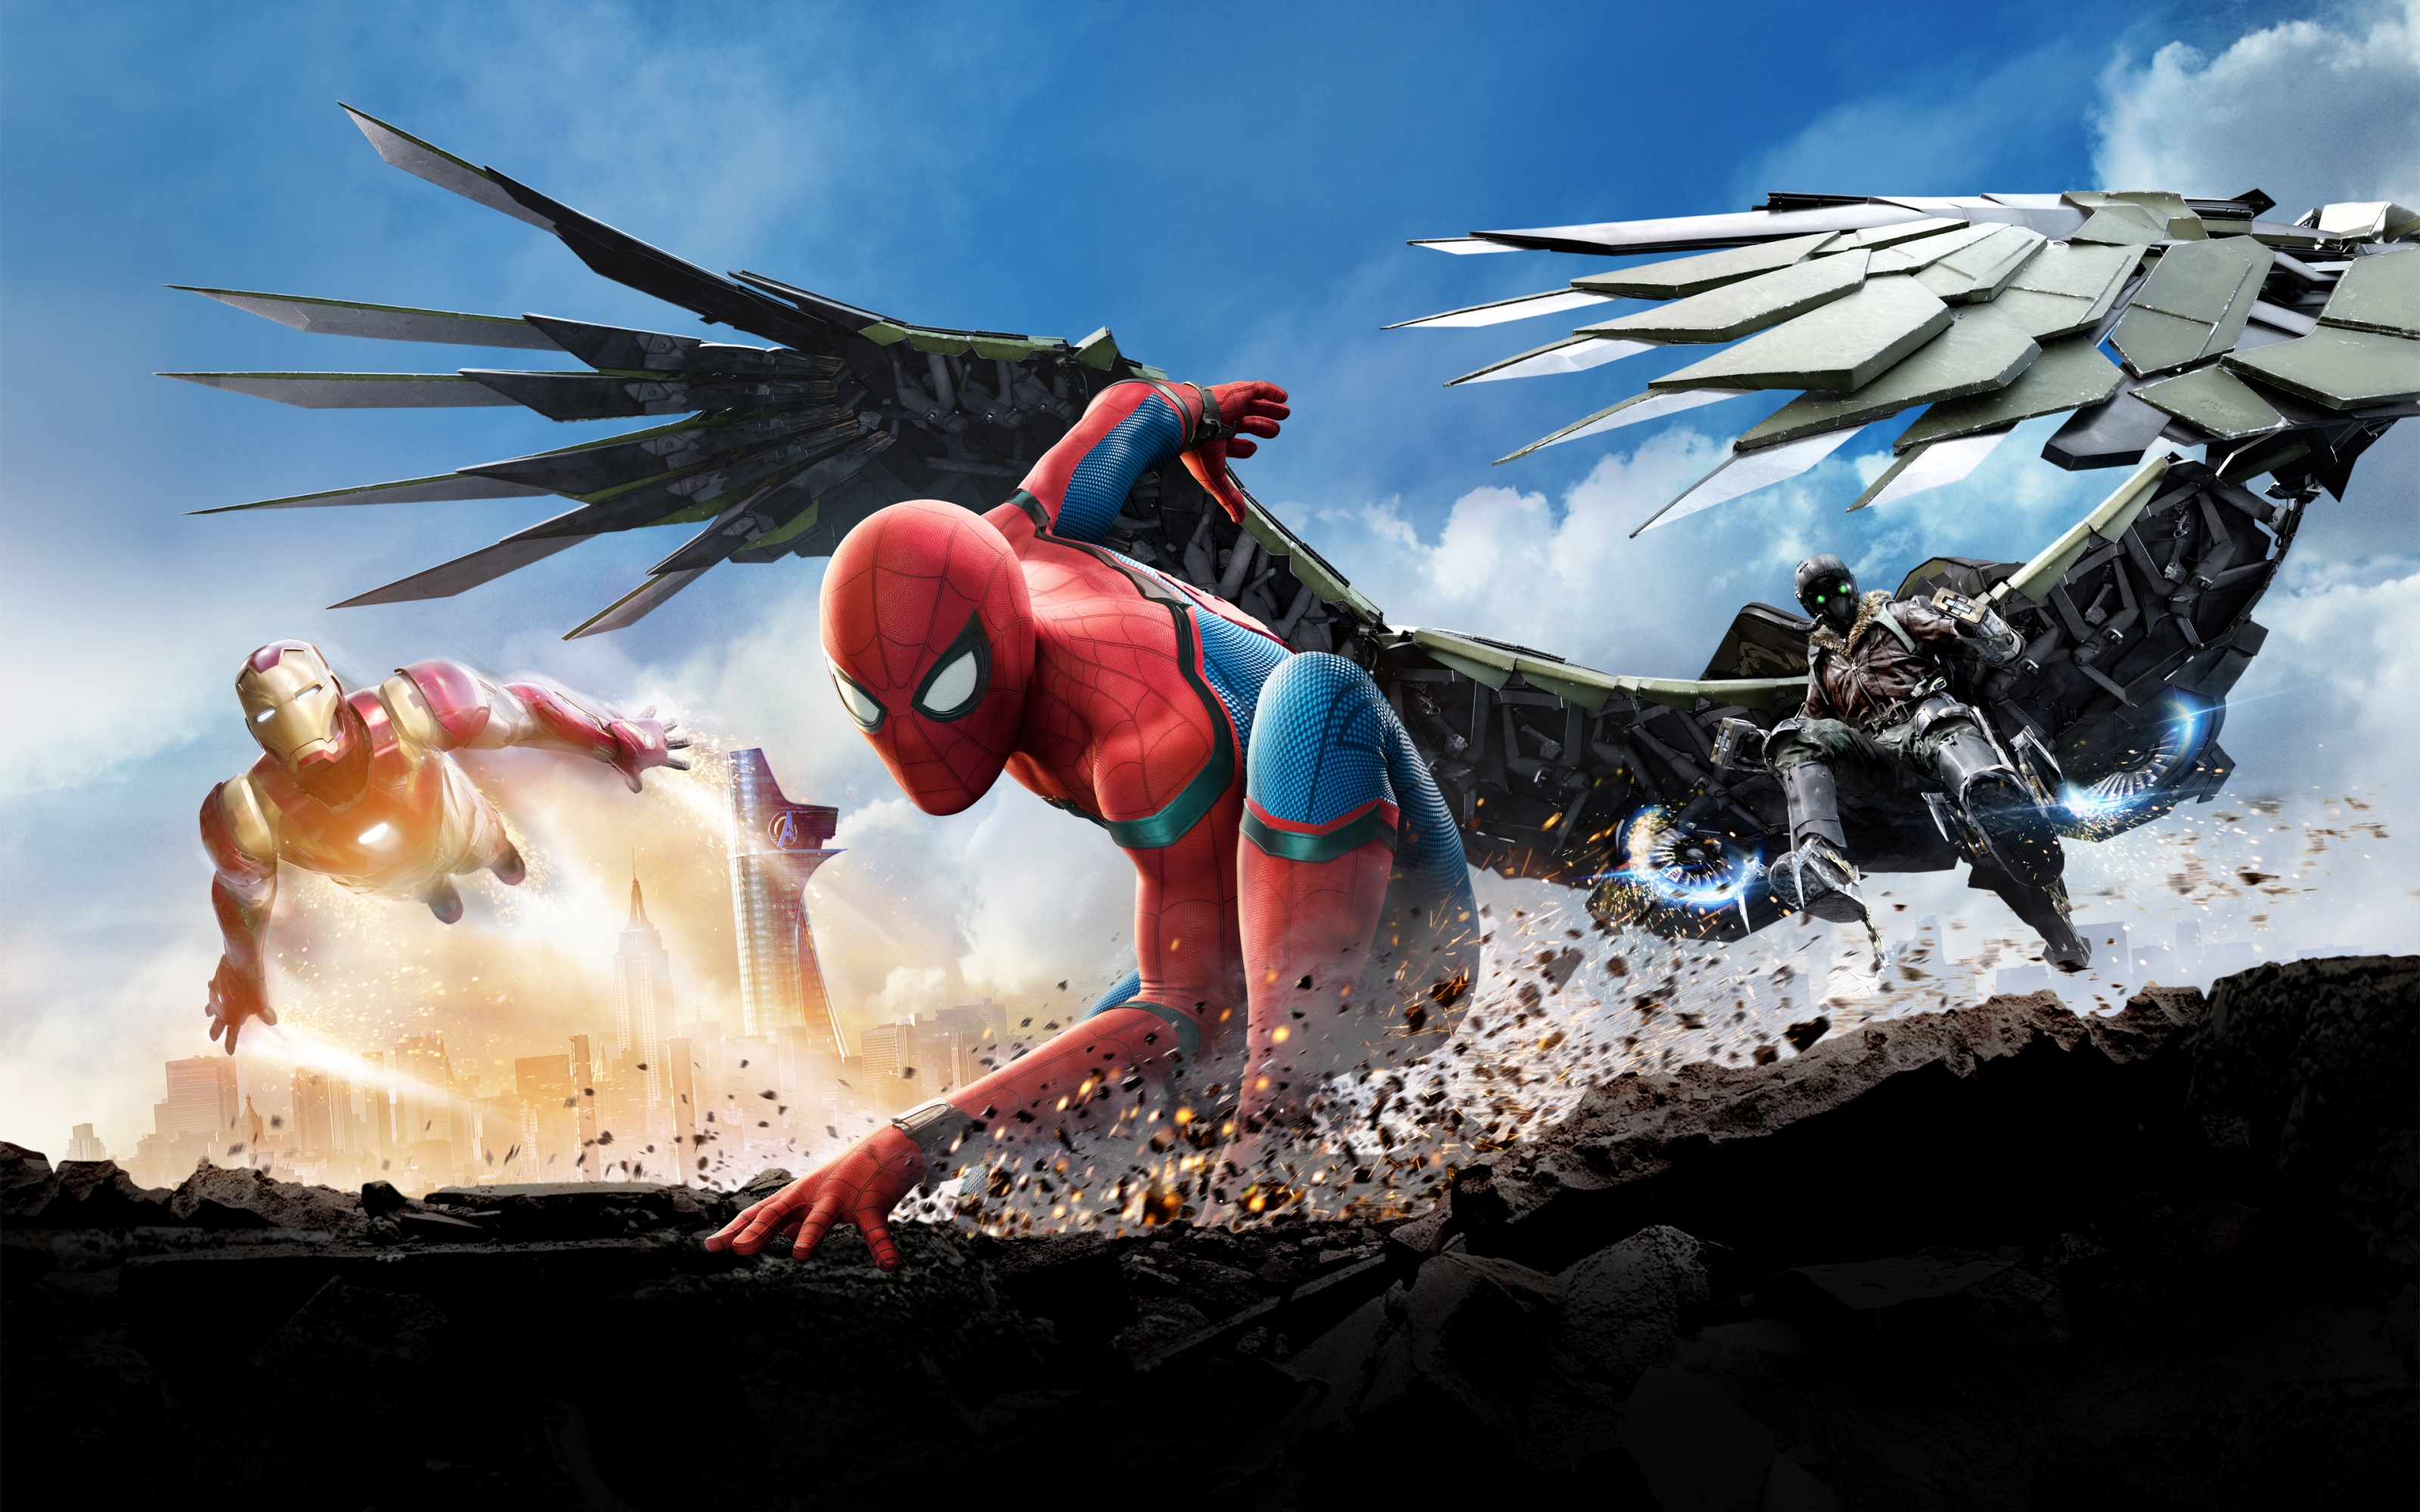 Spiderman Home Coming 2017 for 3200 x 2000 Wide Retina Display resolution